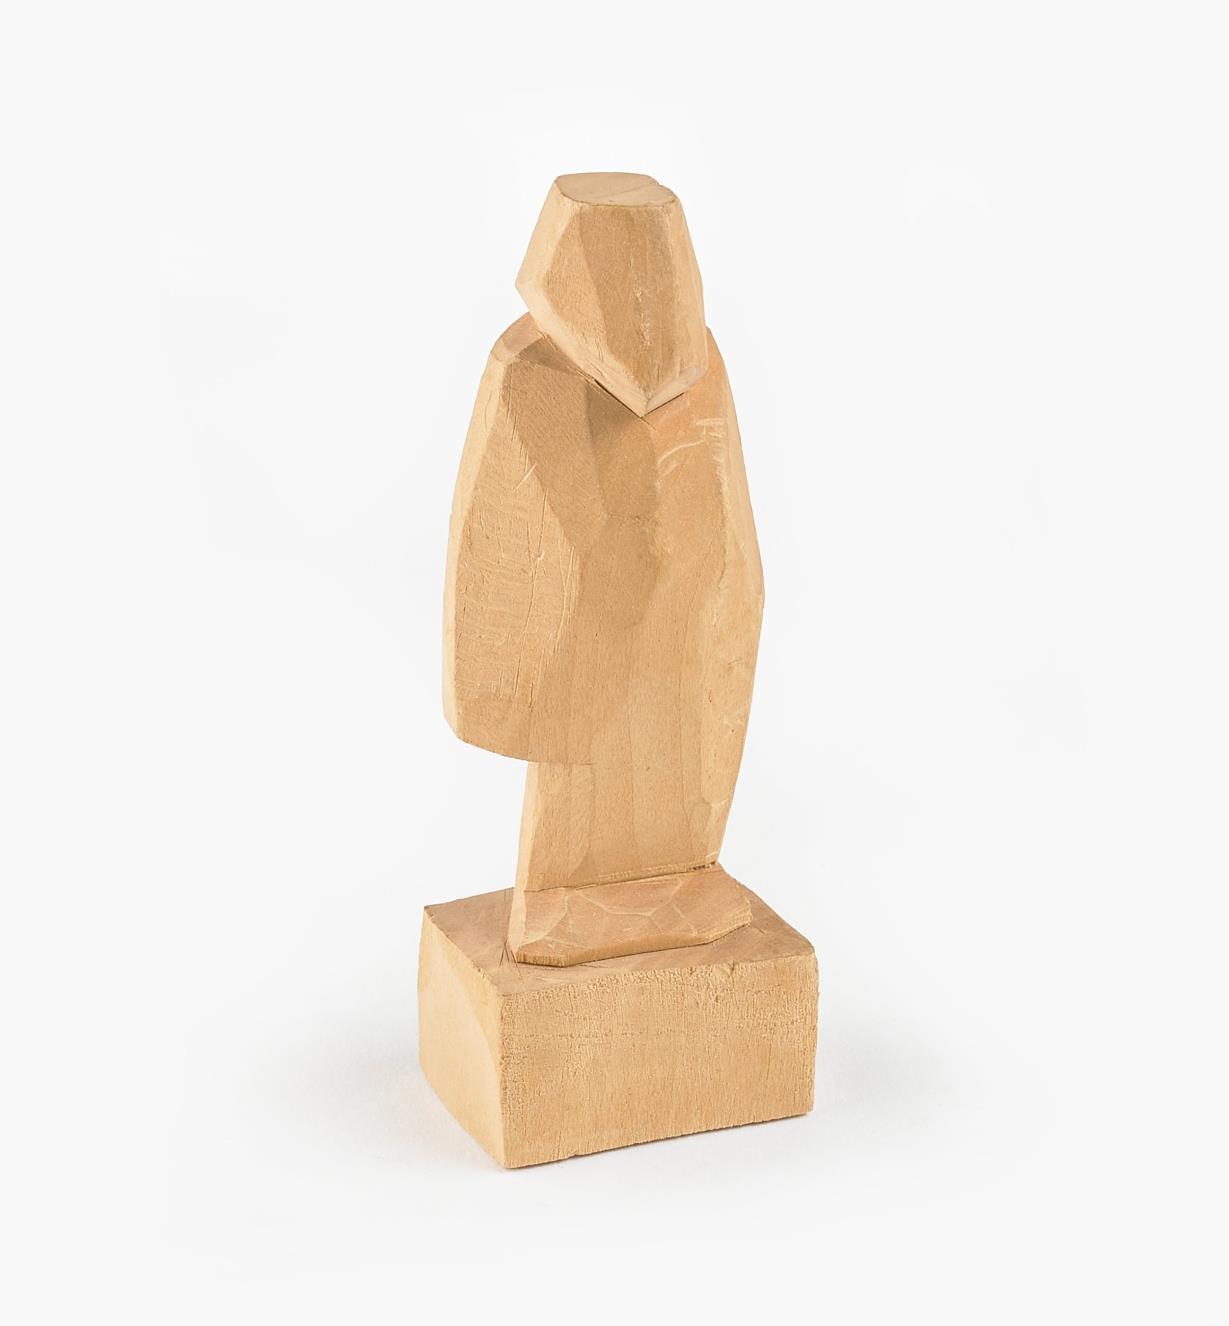 Example of carving made from basswood blank